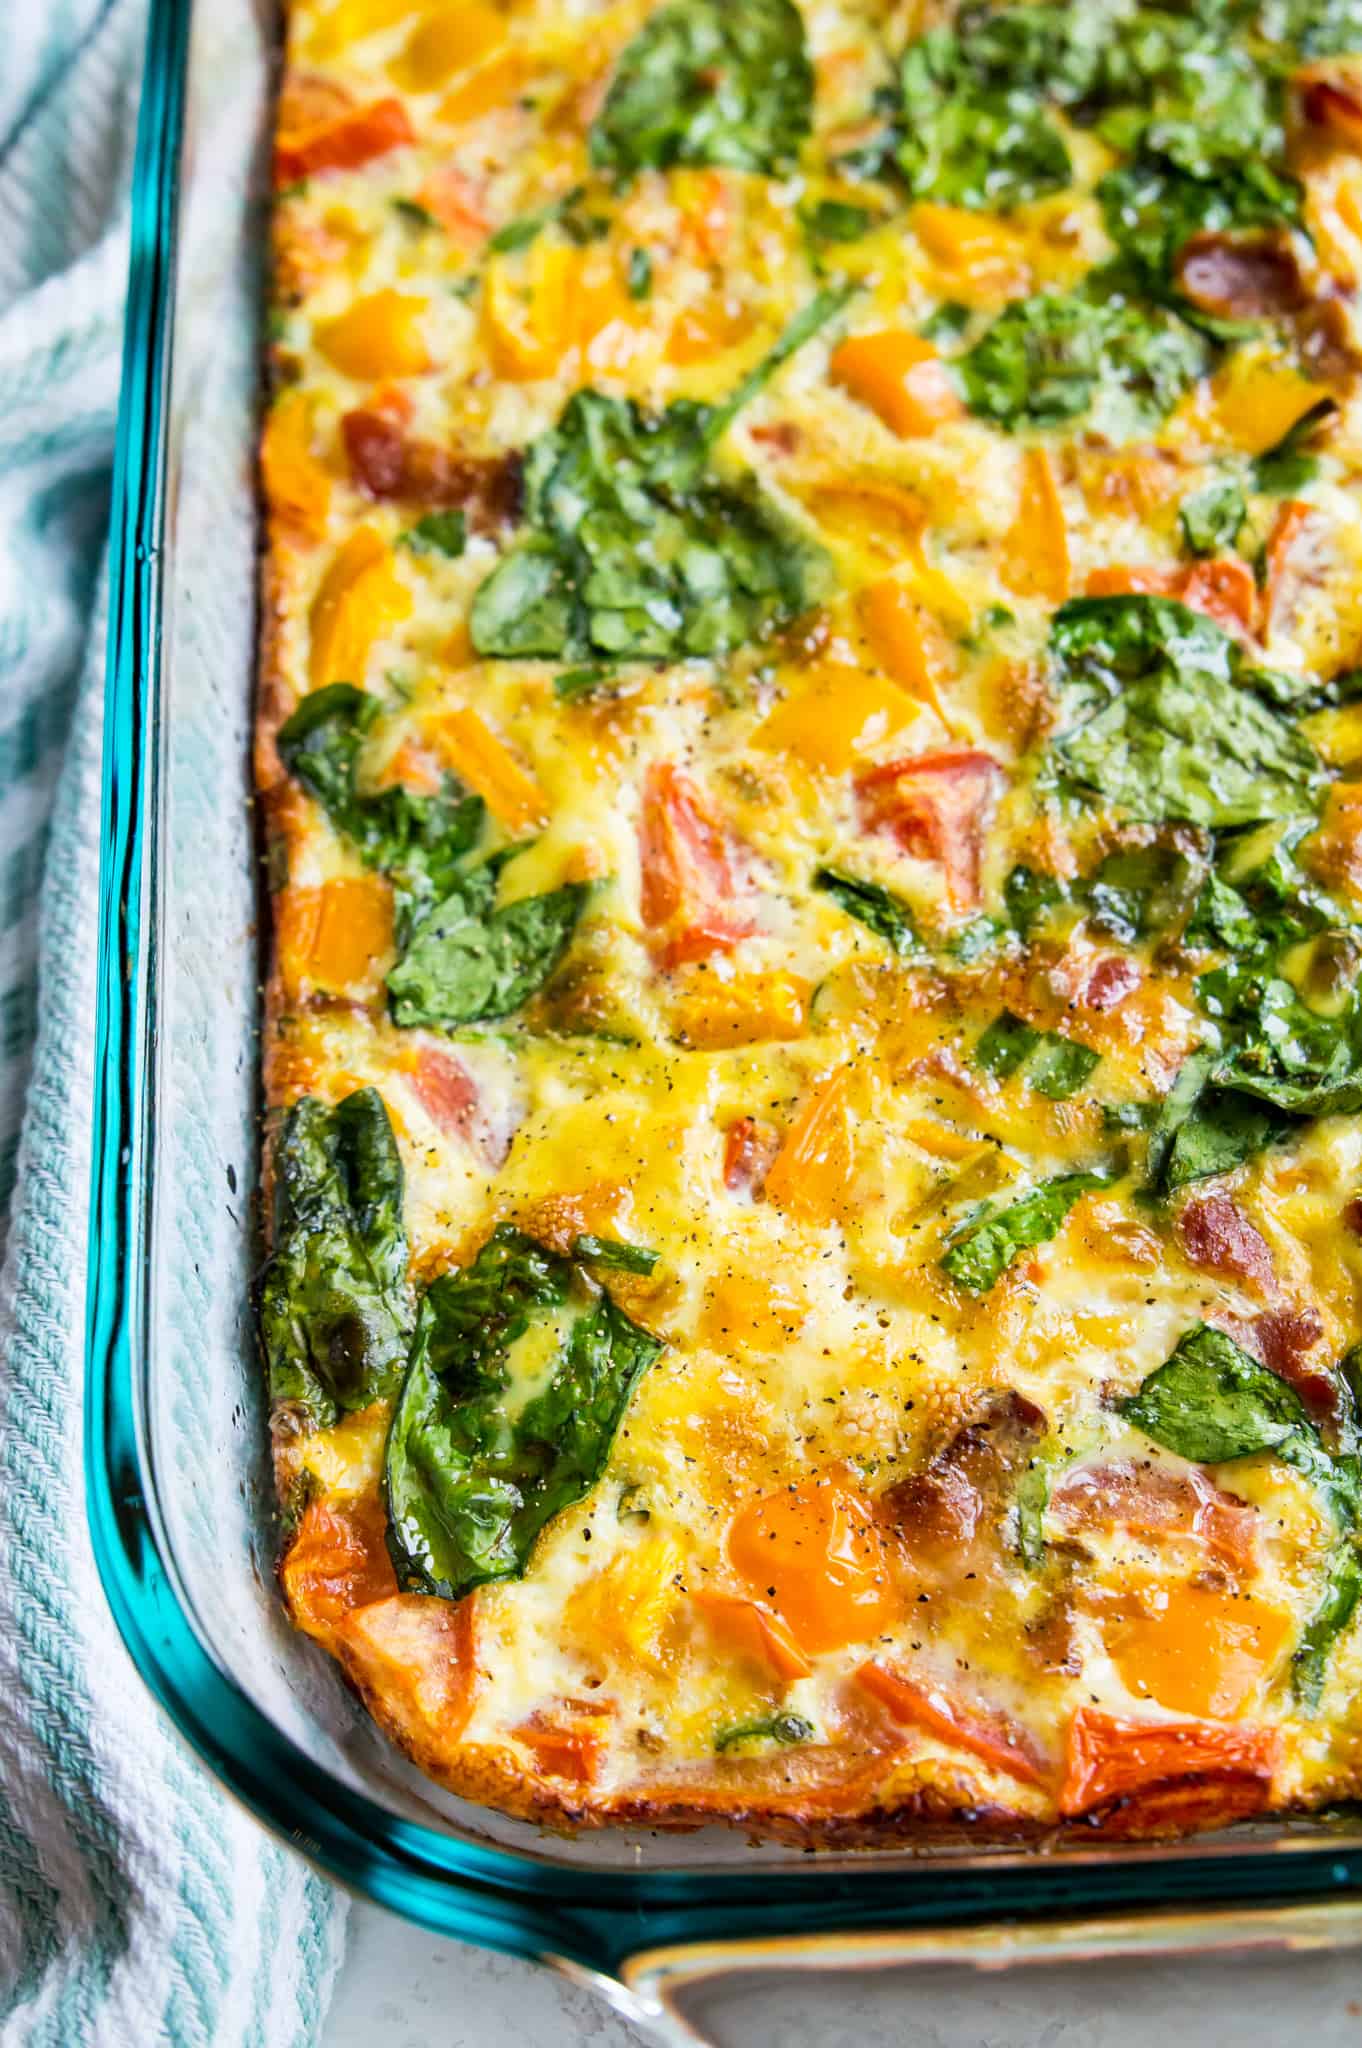 A pan filled with a cooked bacon and vegetable egg casserole with spinach, peppers and spices in it.